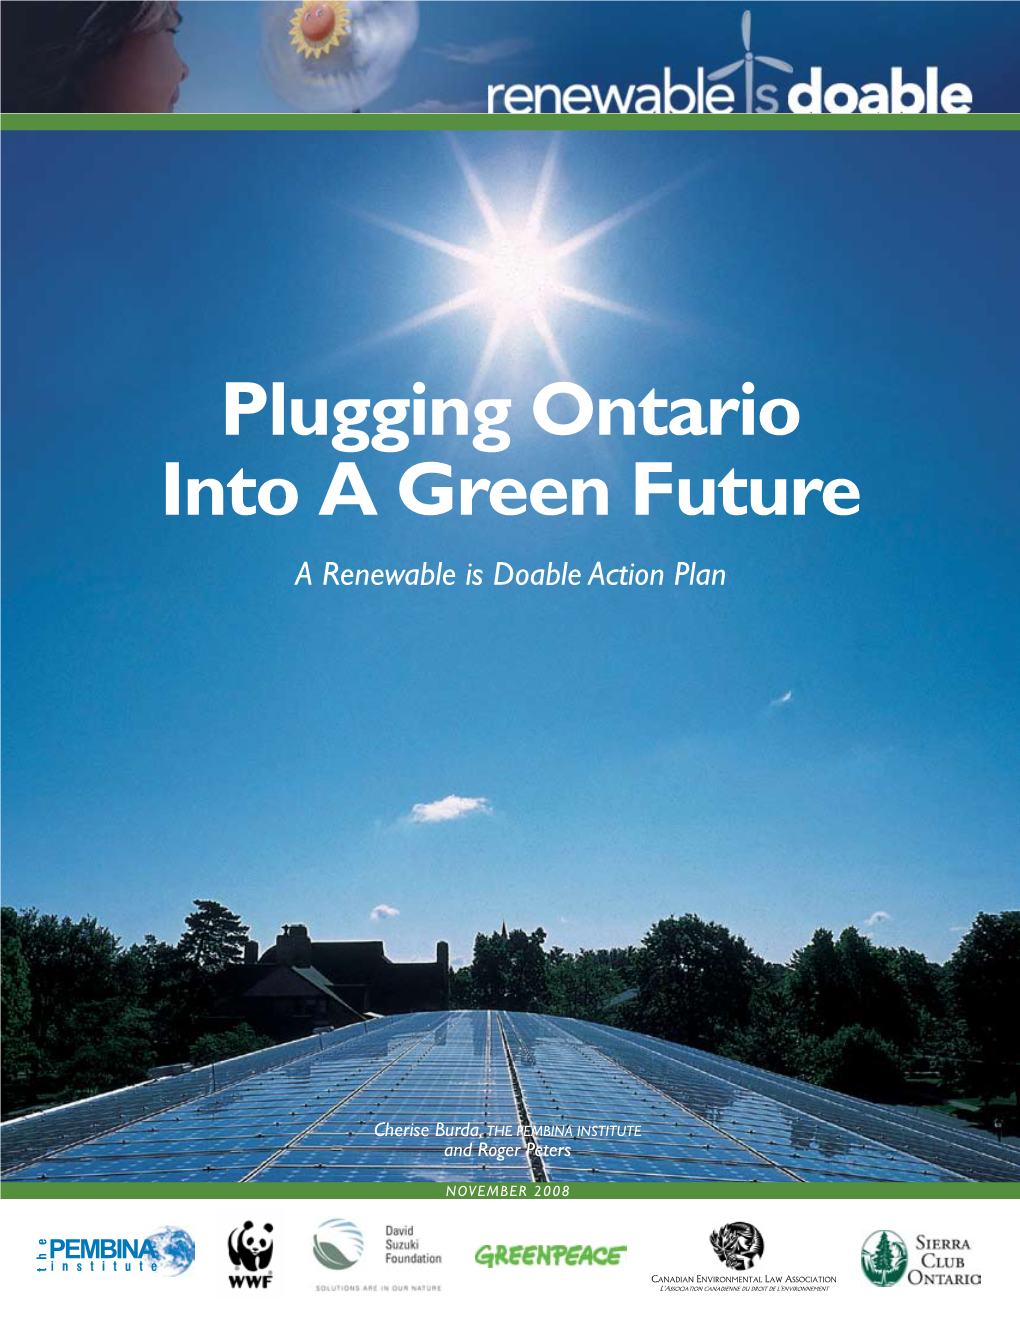 Plugging Ontario Into a Green Future a Renewable Is Doable Action Plan